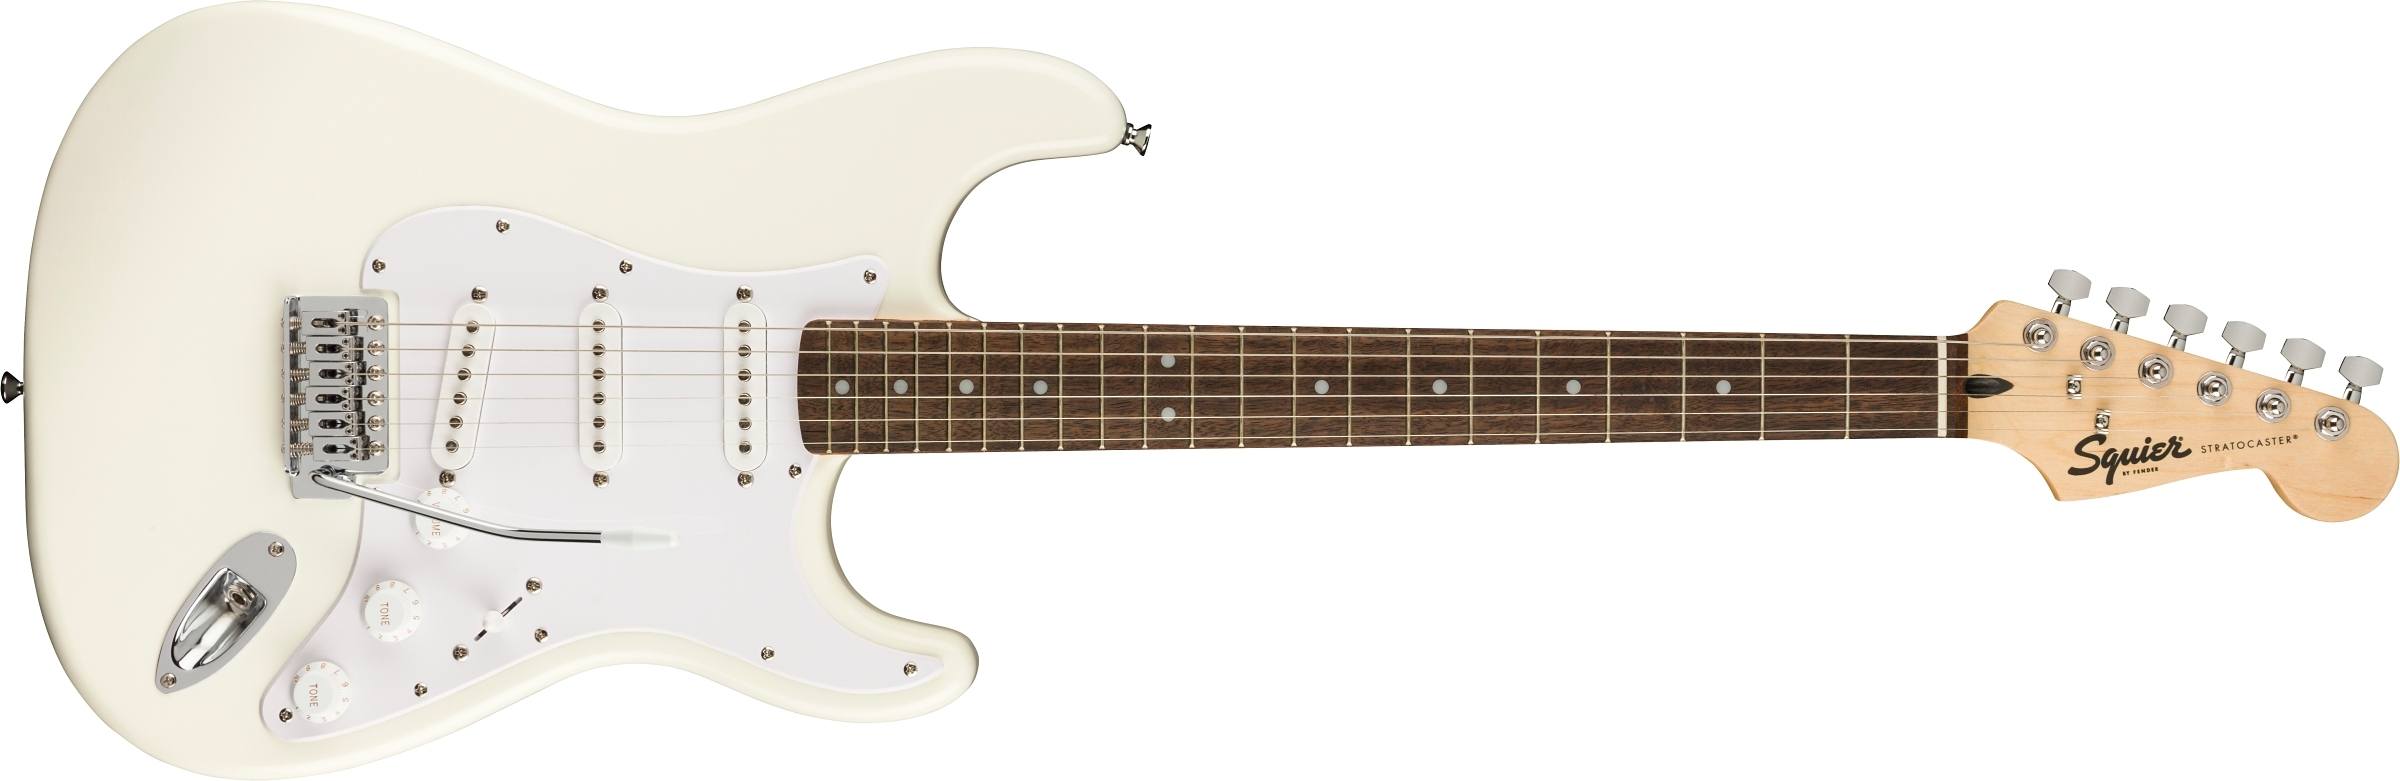 Squier Bullet Stratocaster - The Guitar Lounge